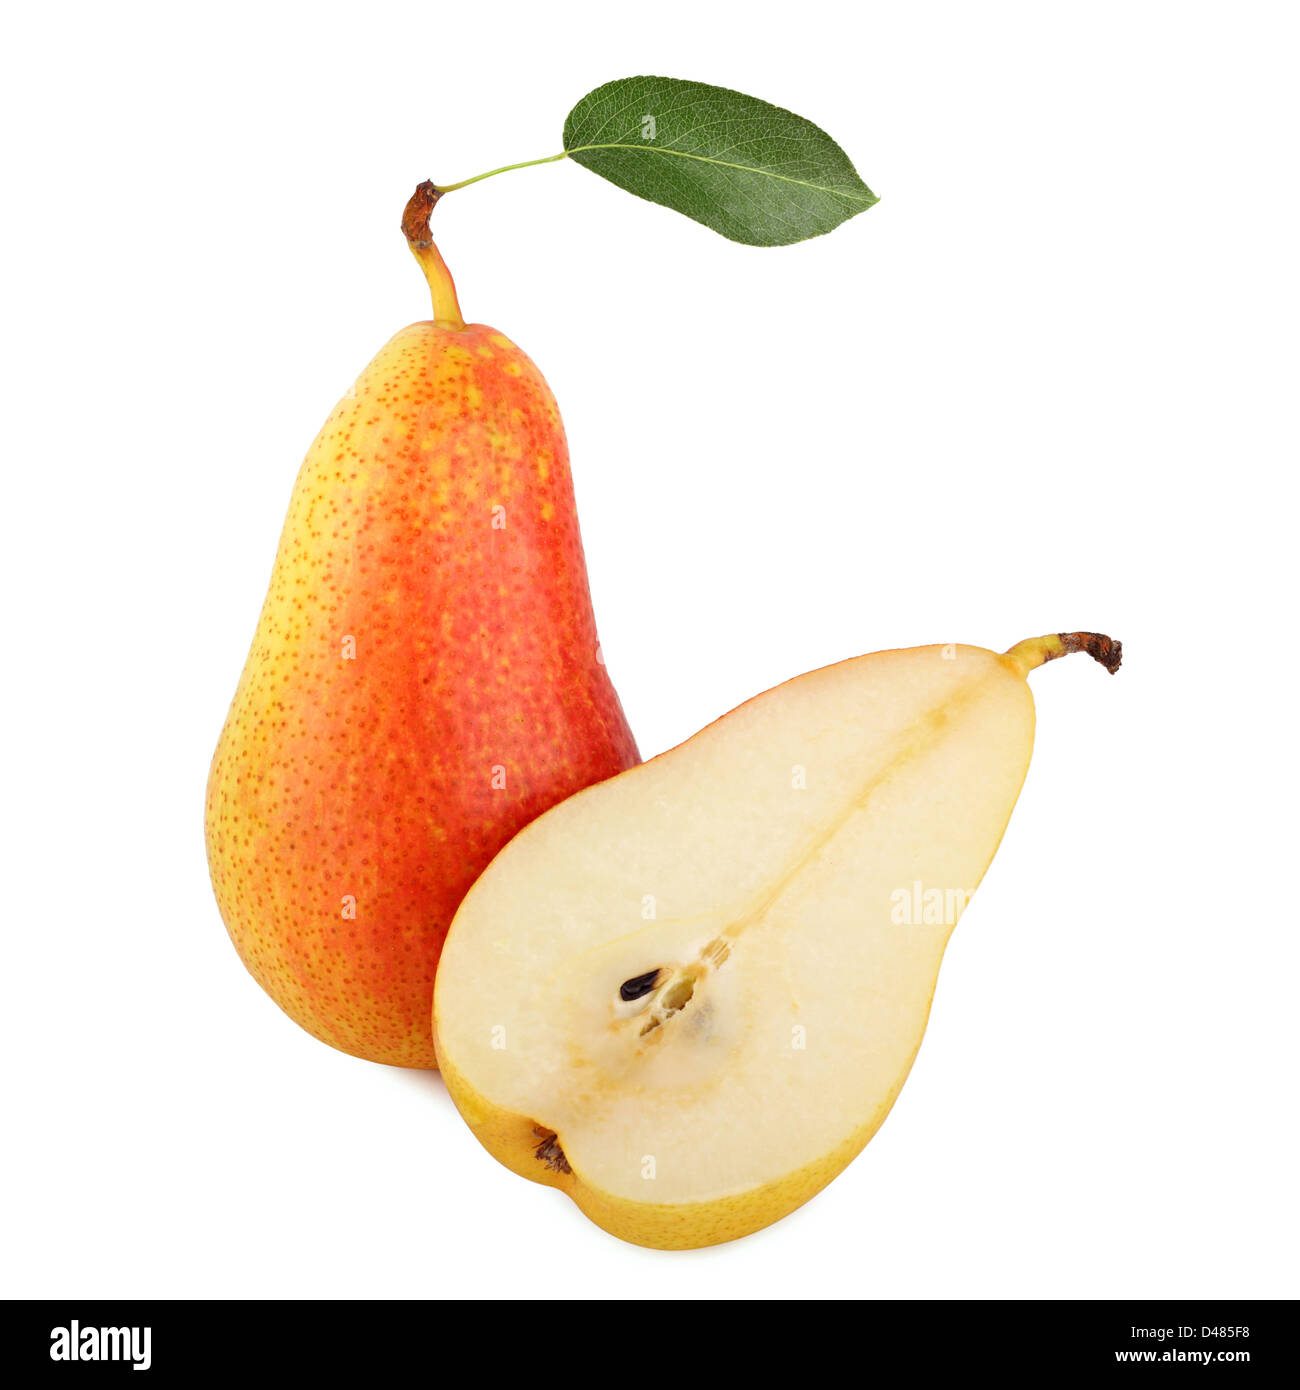 A fresh pear with an cutted half pear. Stock Photo